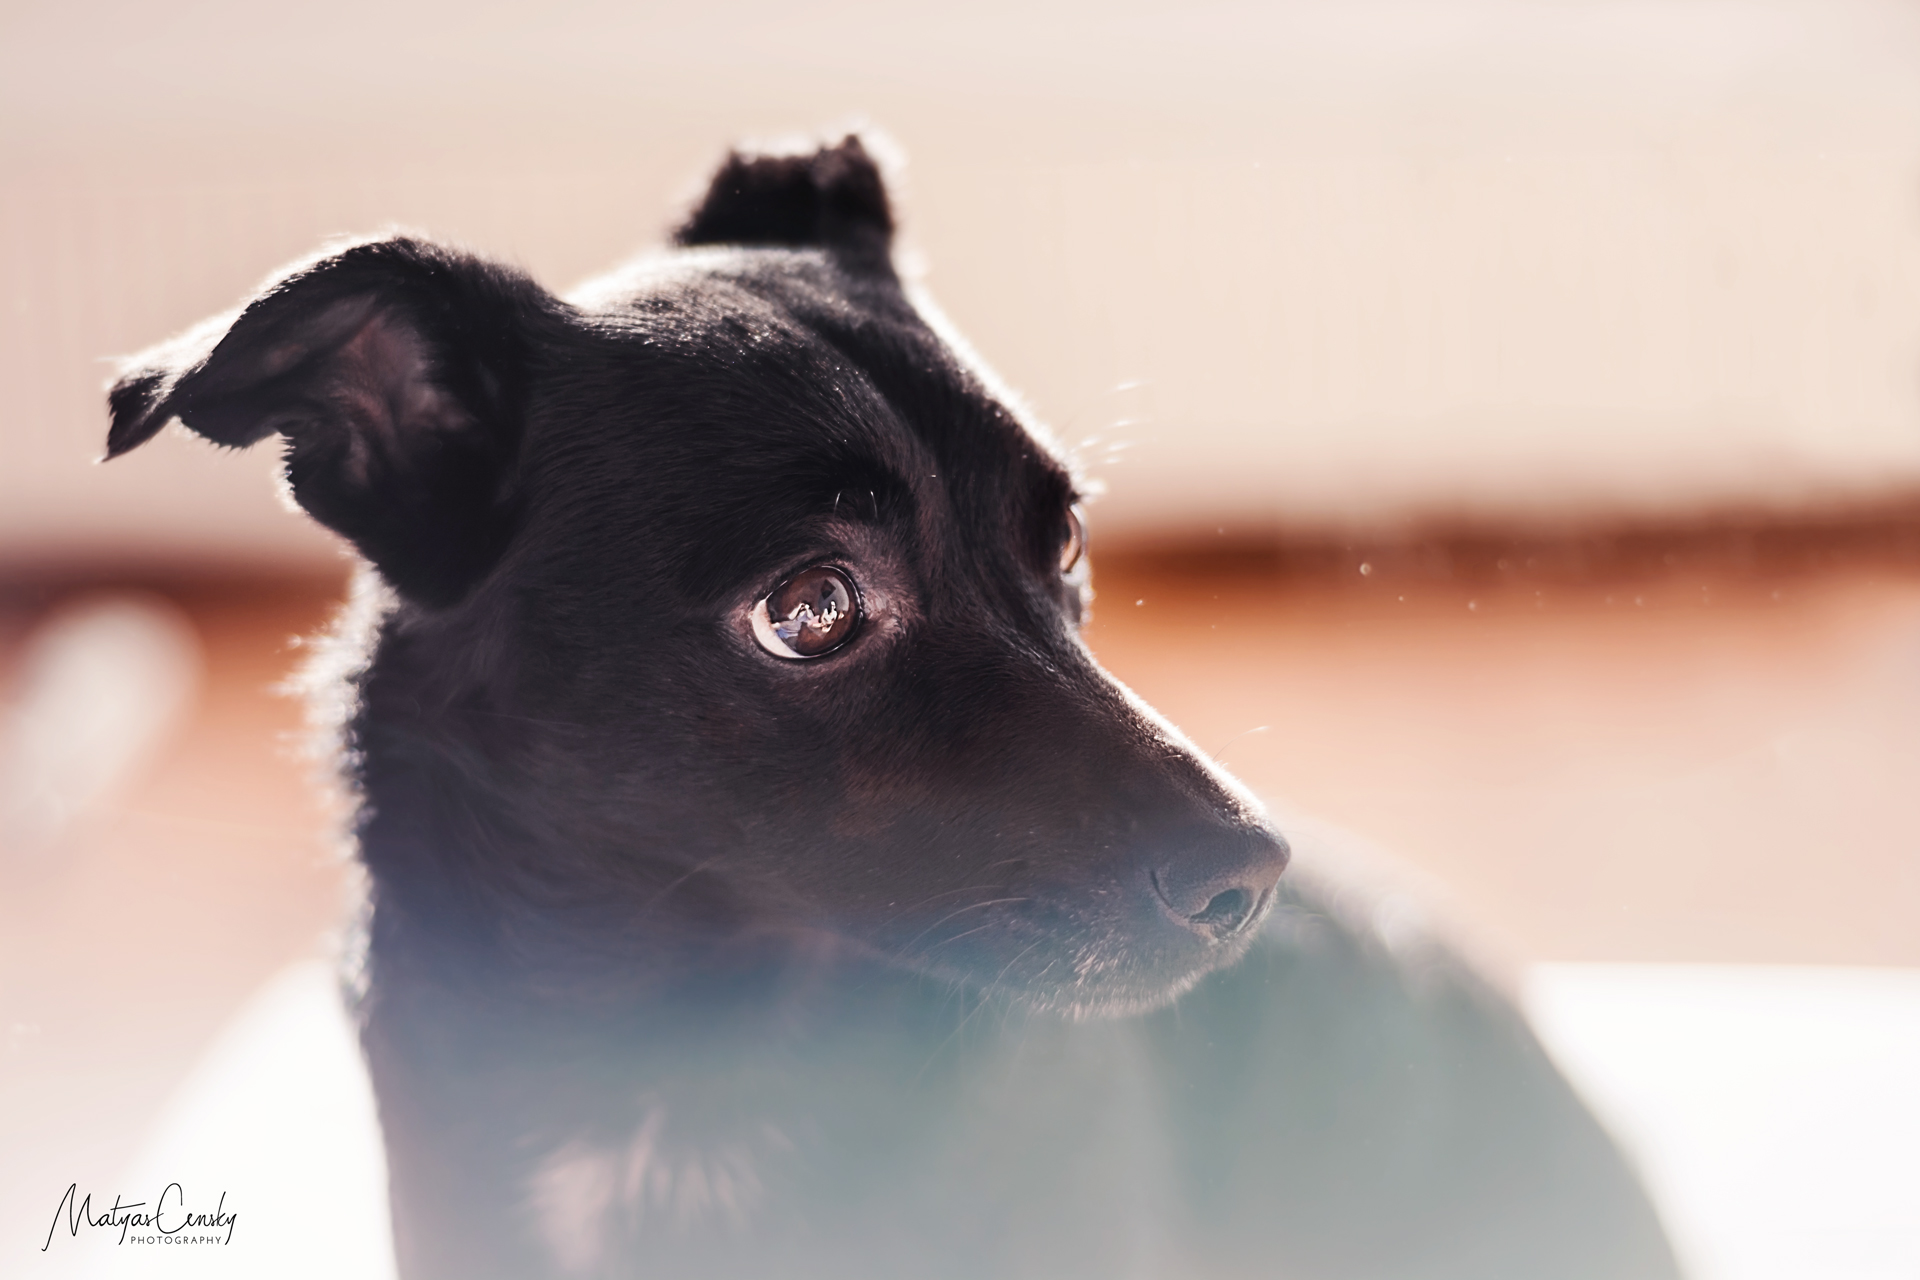 Close up photo of black jack russel terrier named Bruni in window soft light looking to the side of the photo.